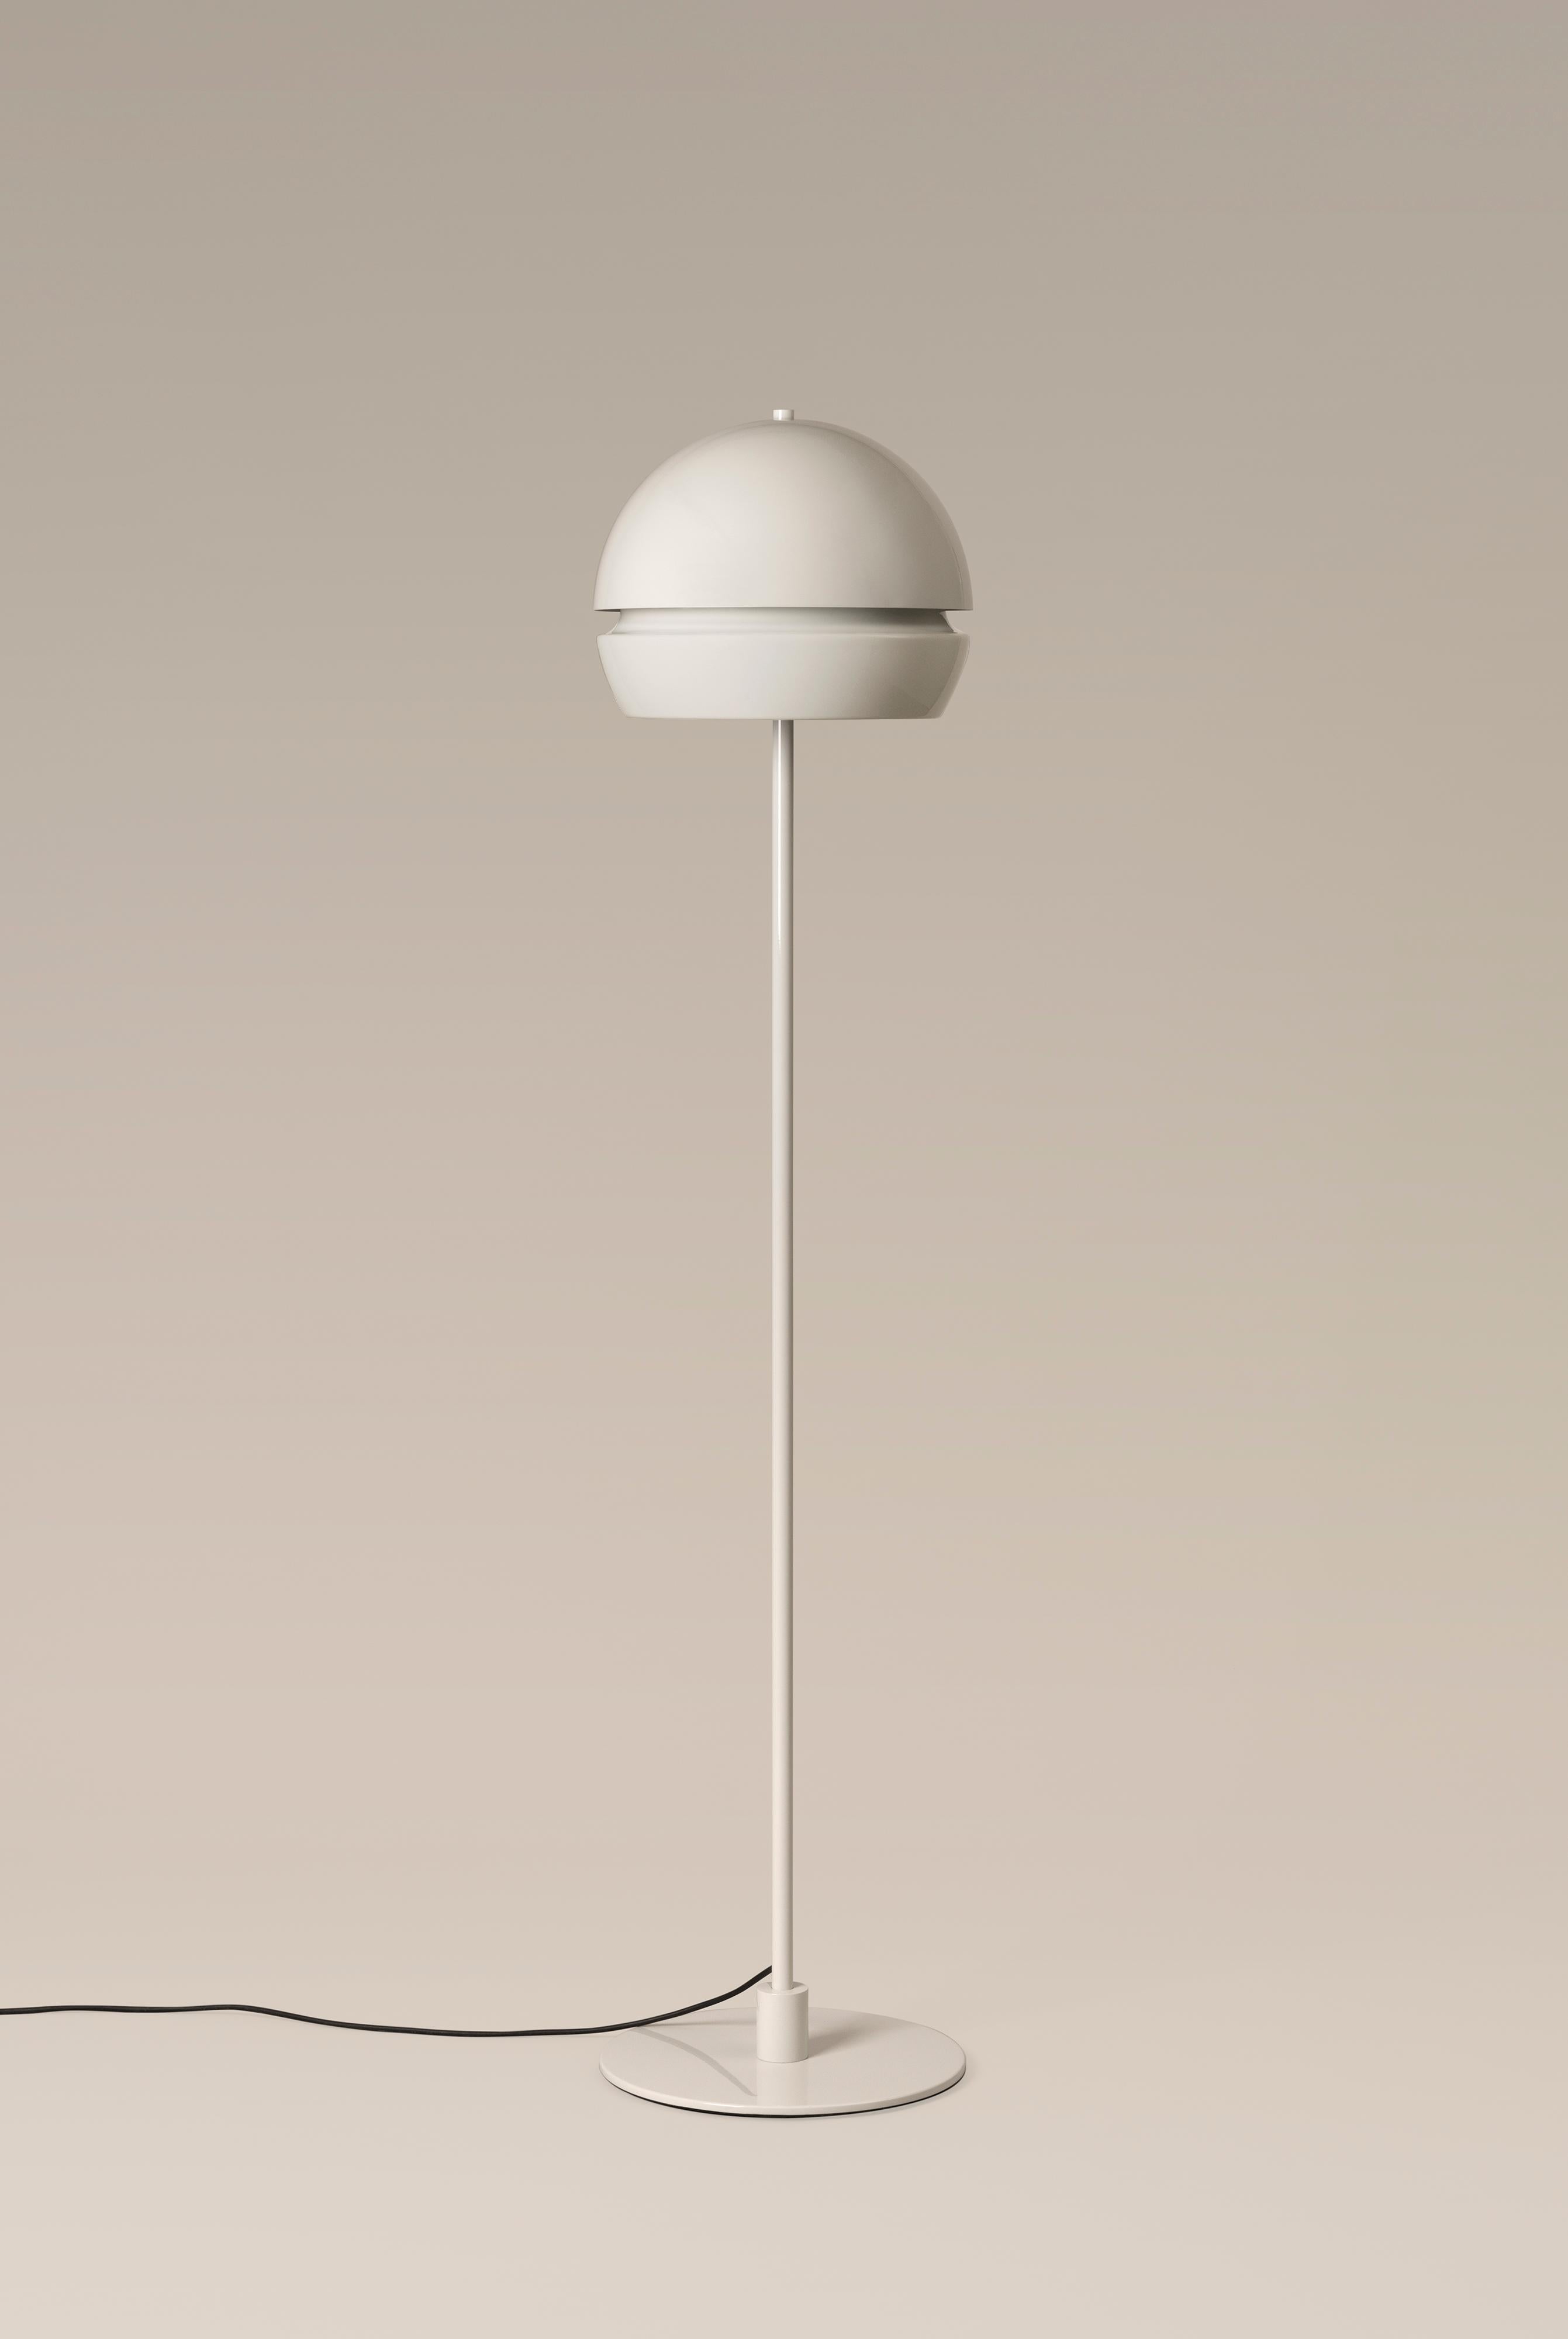 Fontana floor lamp by André Ricard
Dimensions: D 35 x H 158 cm
Materials: Metal.

Maintaining the good size of its more than half sphere lampshade and the peripheral illumination caused by its slit, we are extending the Fontana family by